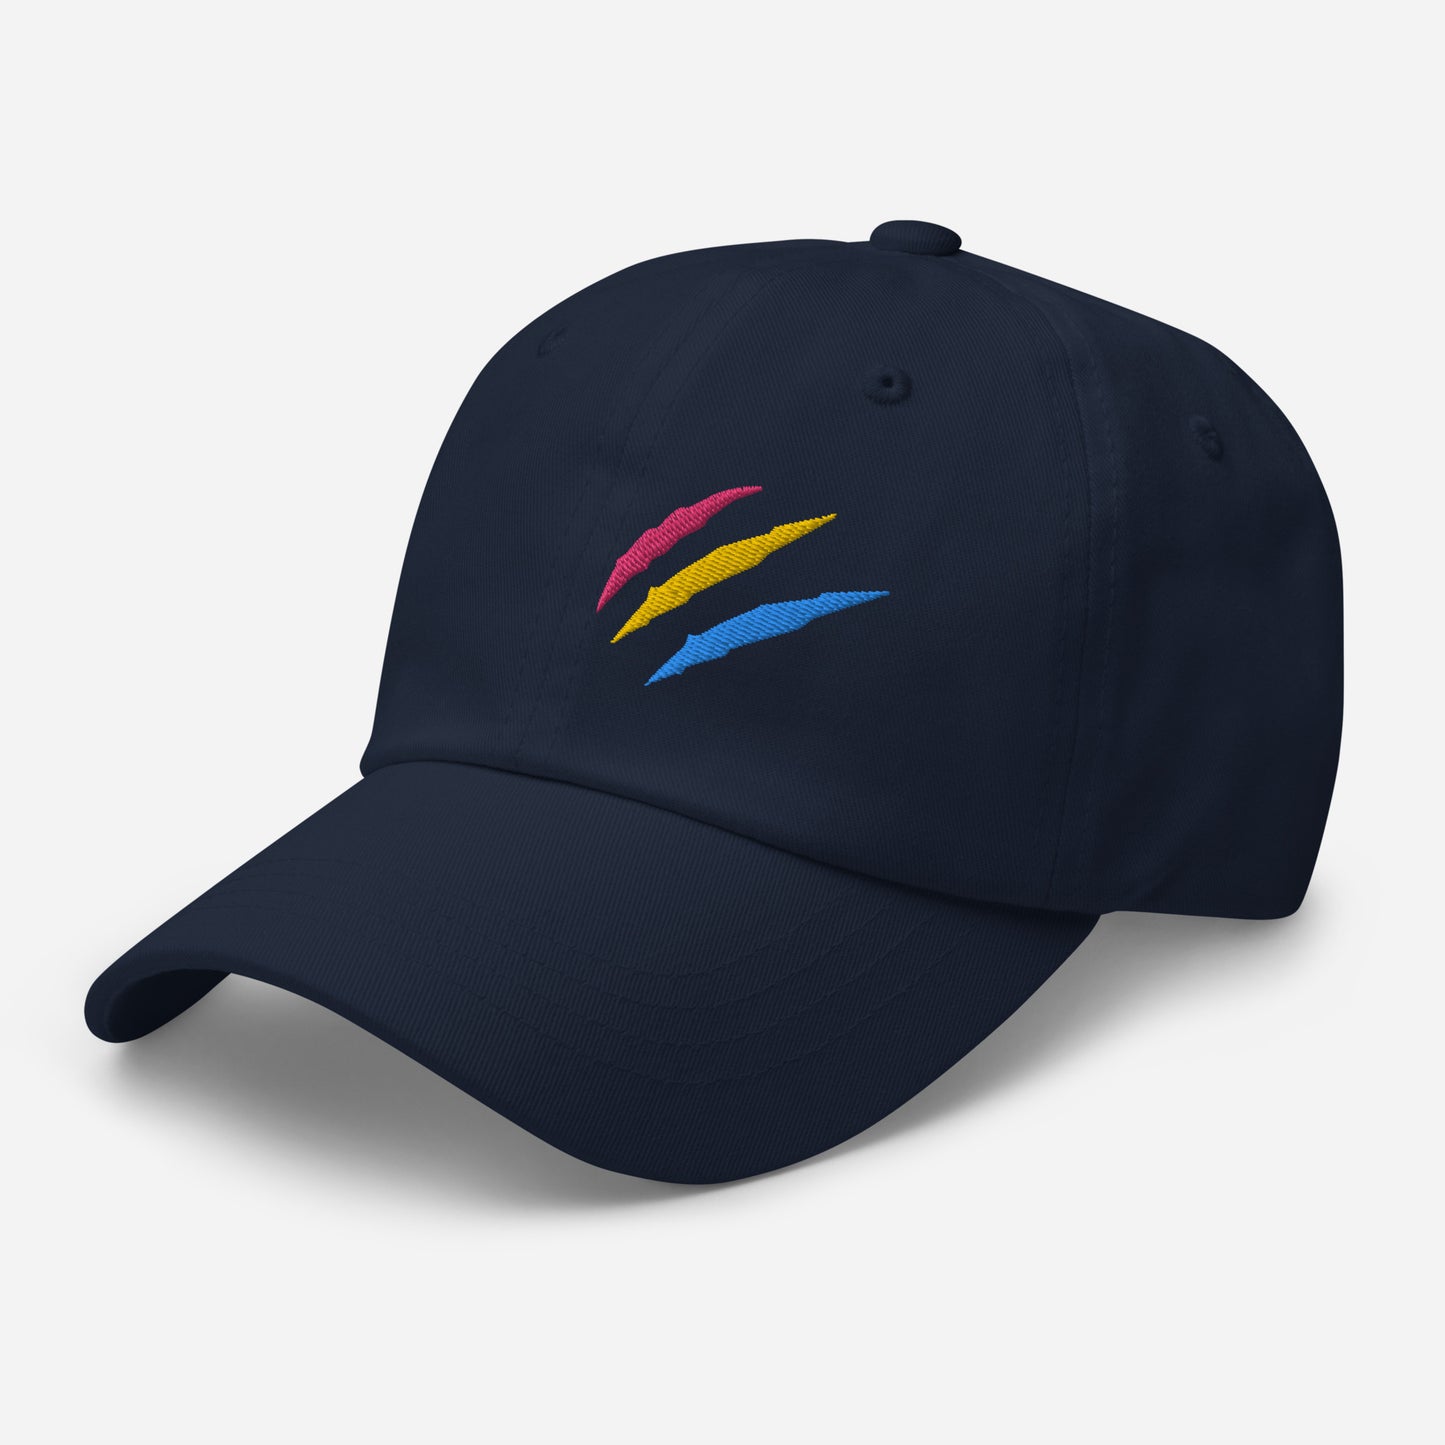 Navy baseball hat featuring pansexual pride scratch mark embroidery with a low profile, adjustable strap.